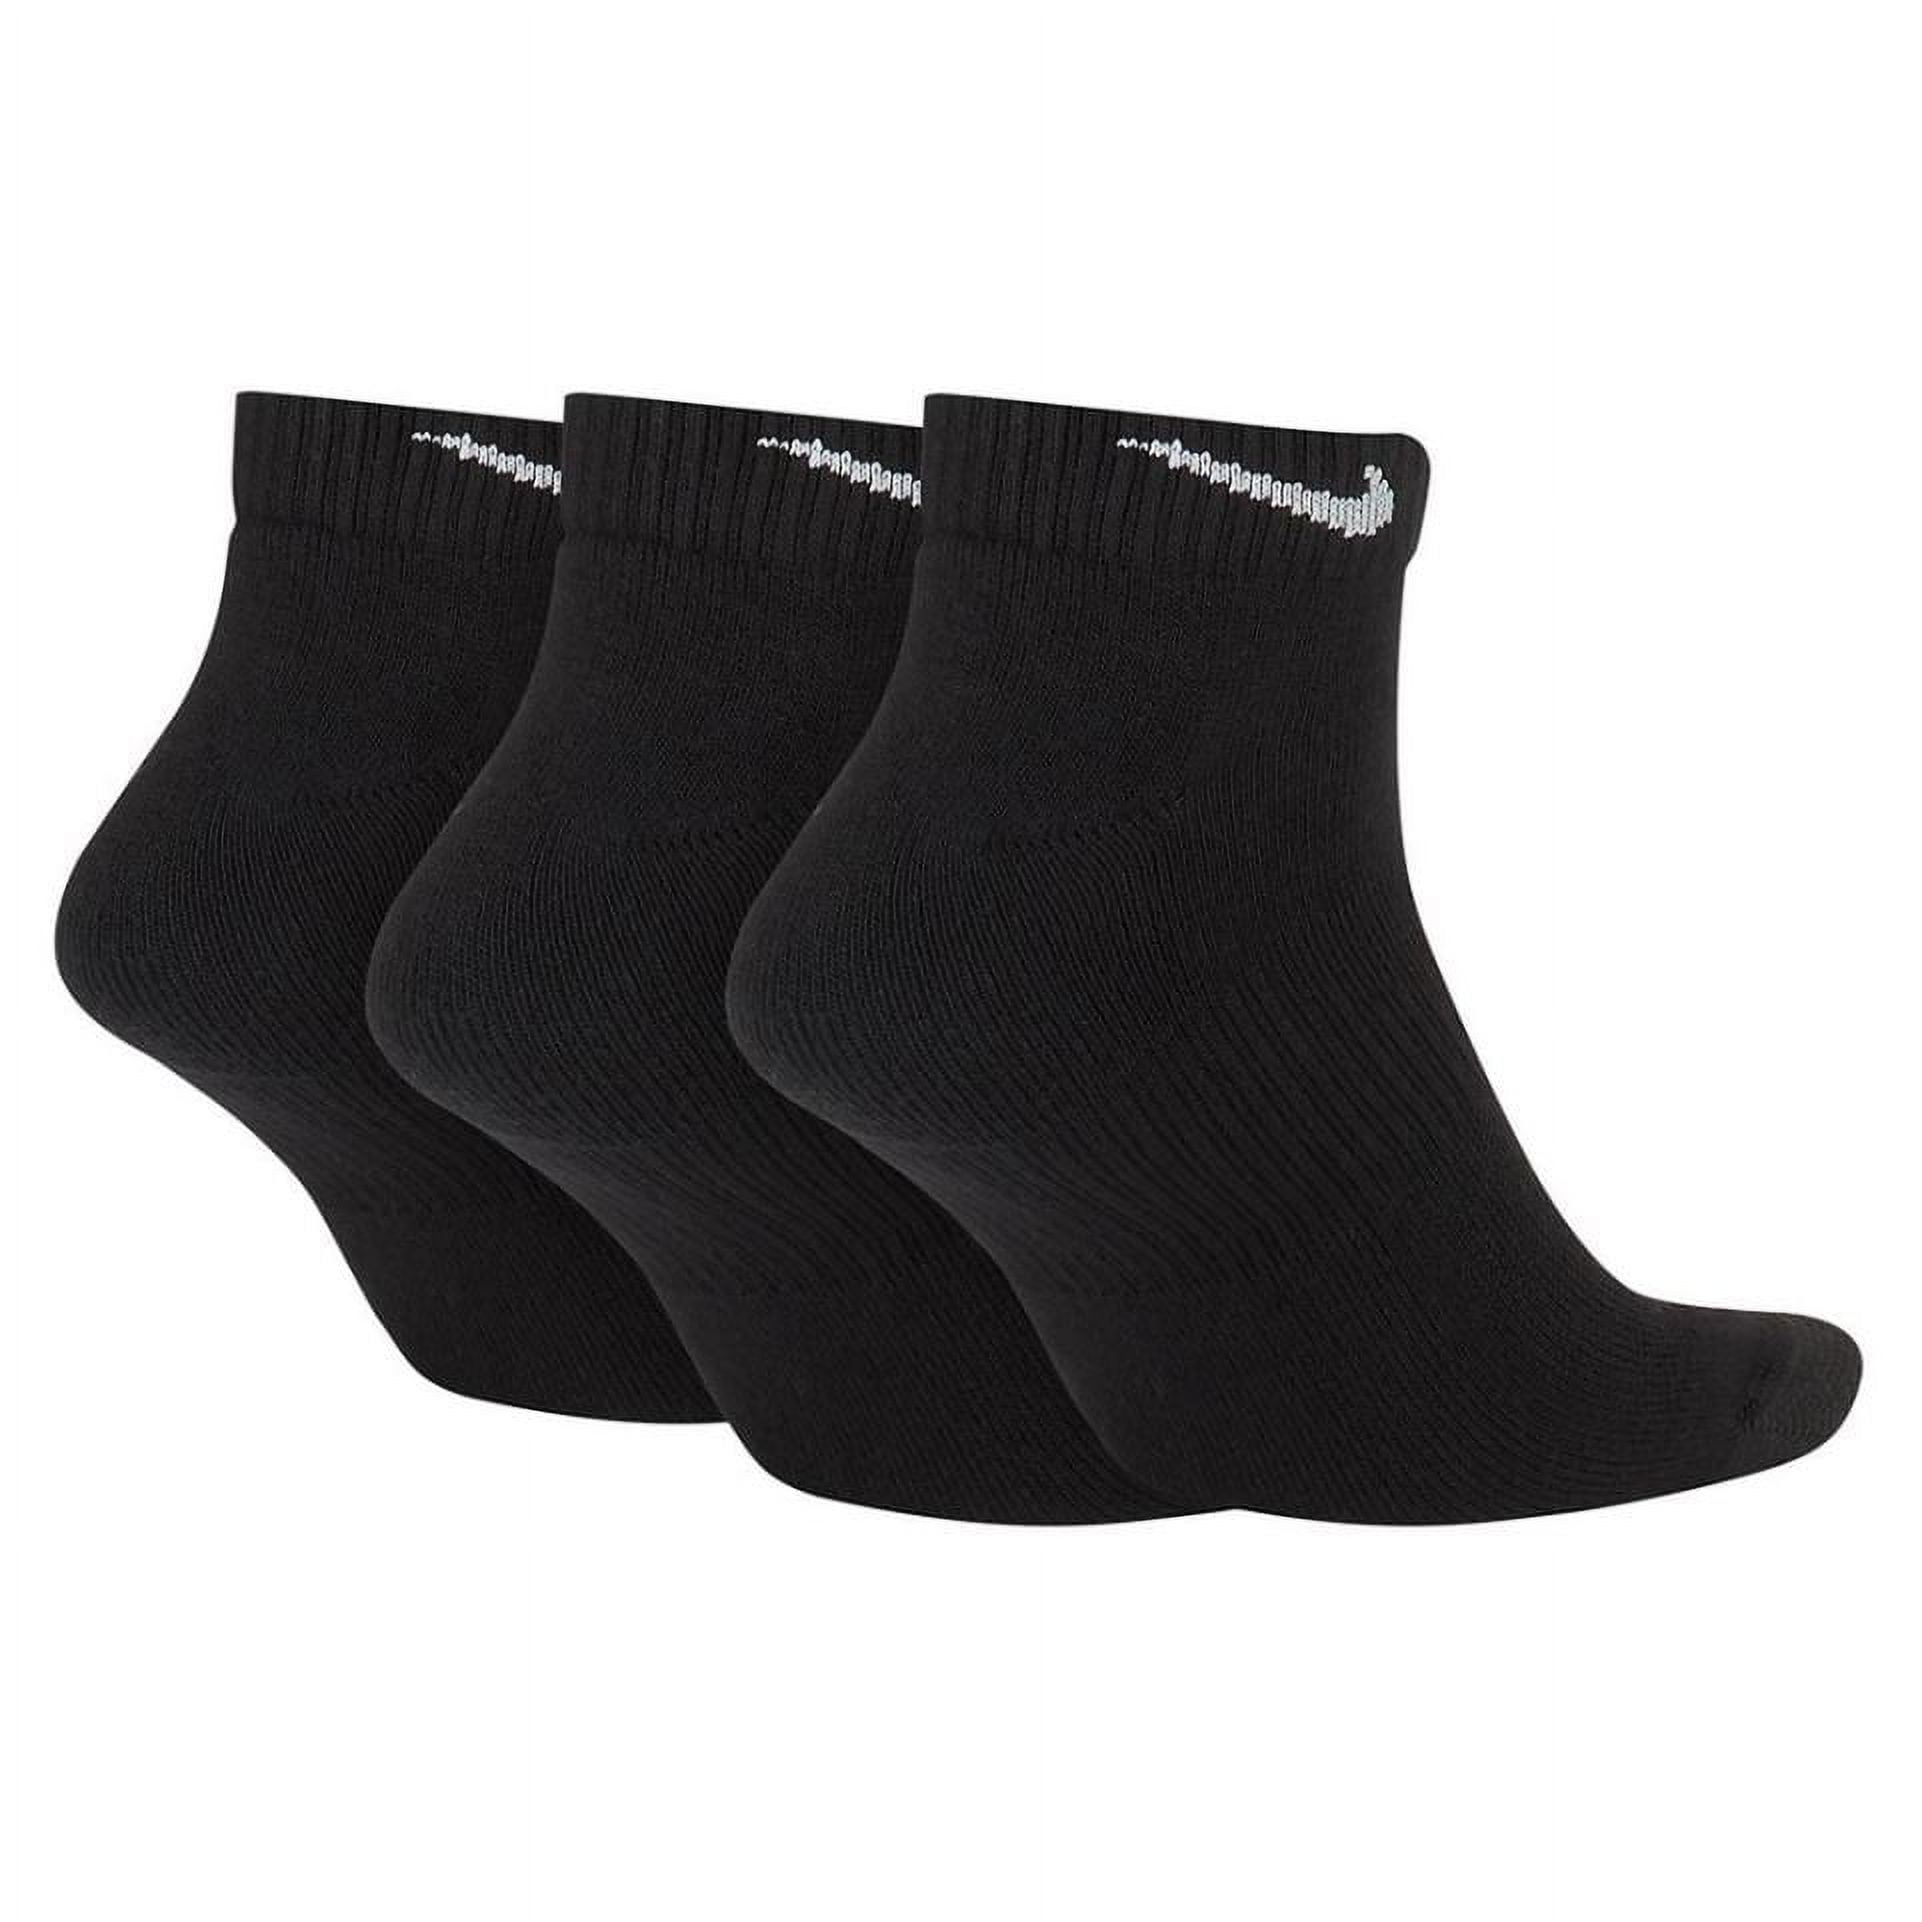 Nike Everyday Cushion Low Training Socks (3 pares), calcetines